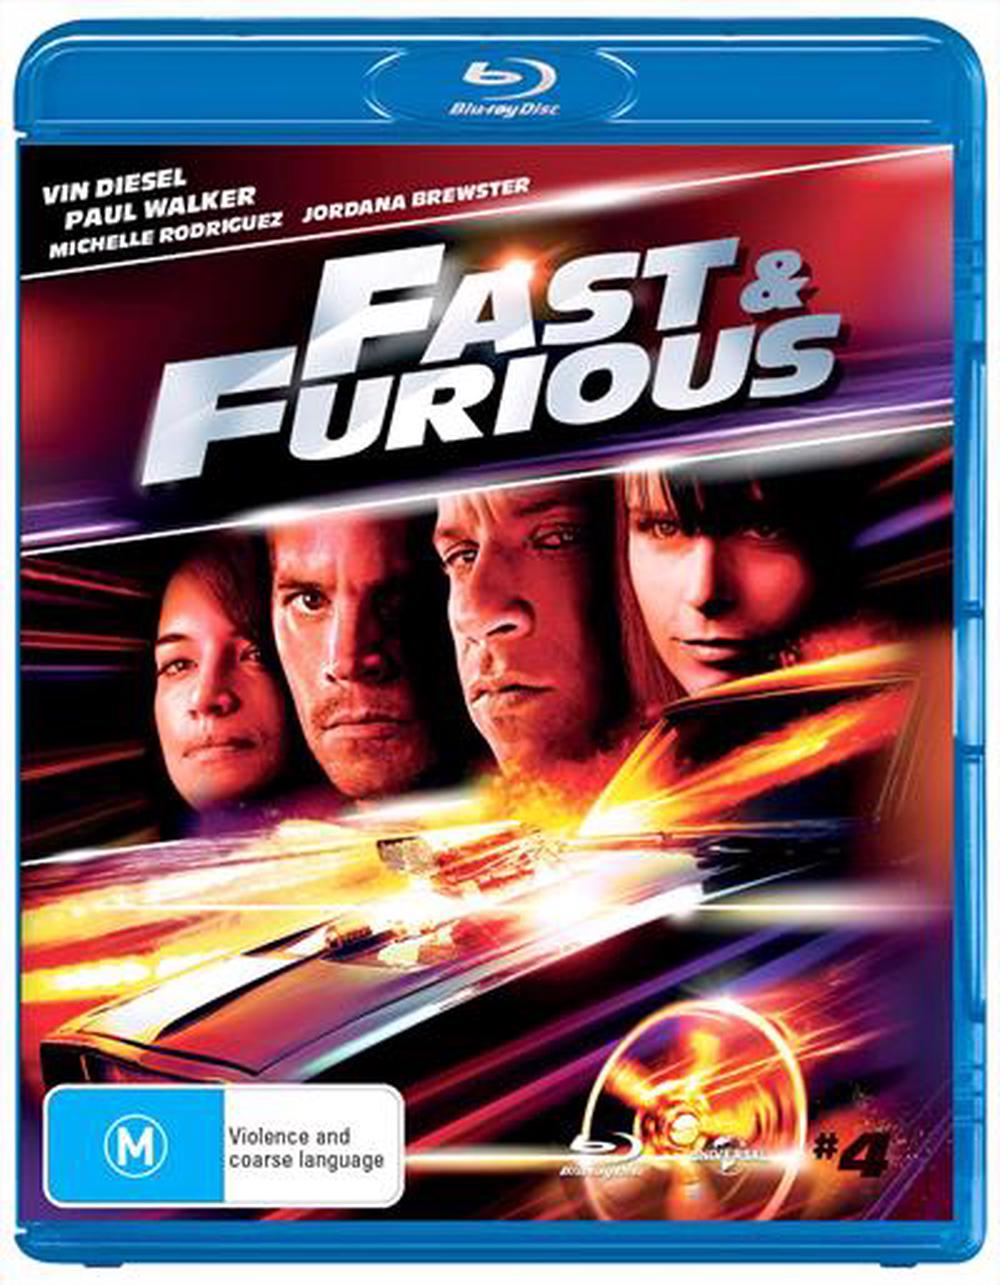 Fast And Furious 4 Blu Ray Buy Online At The Nile